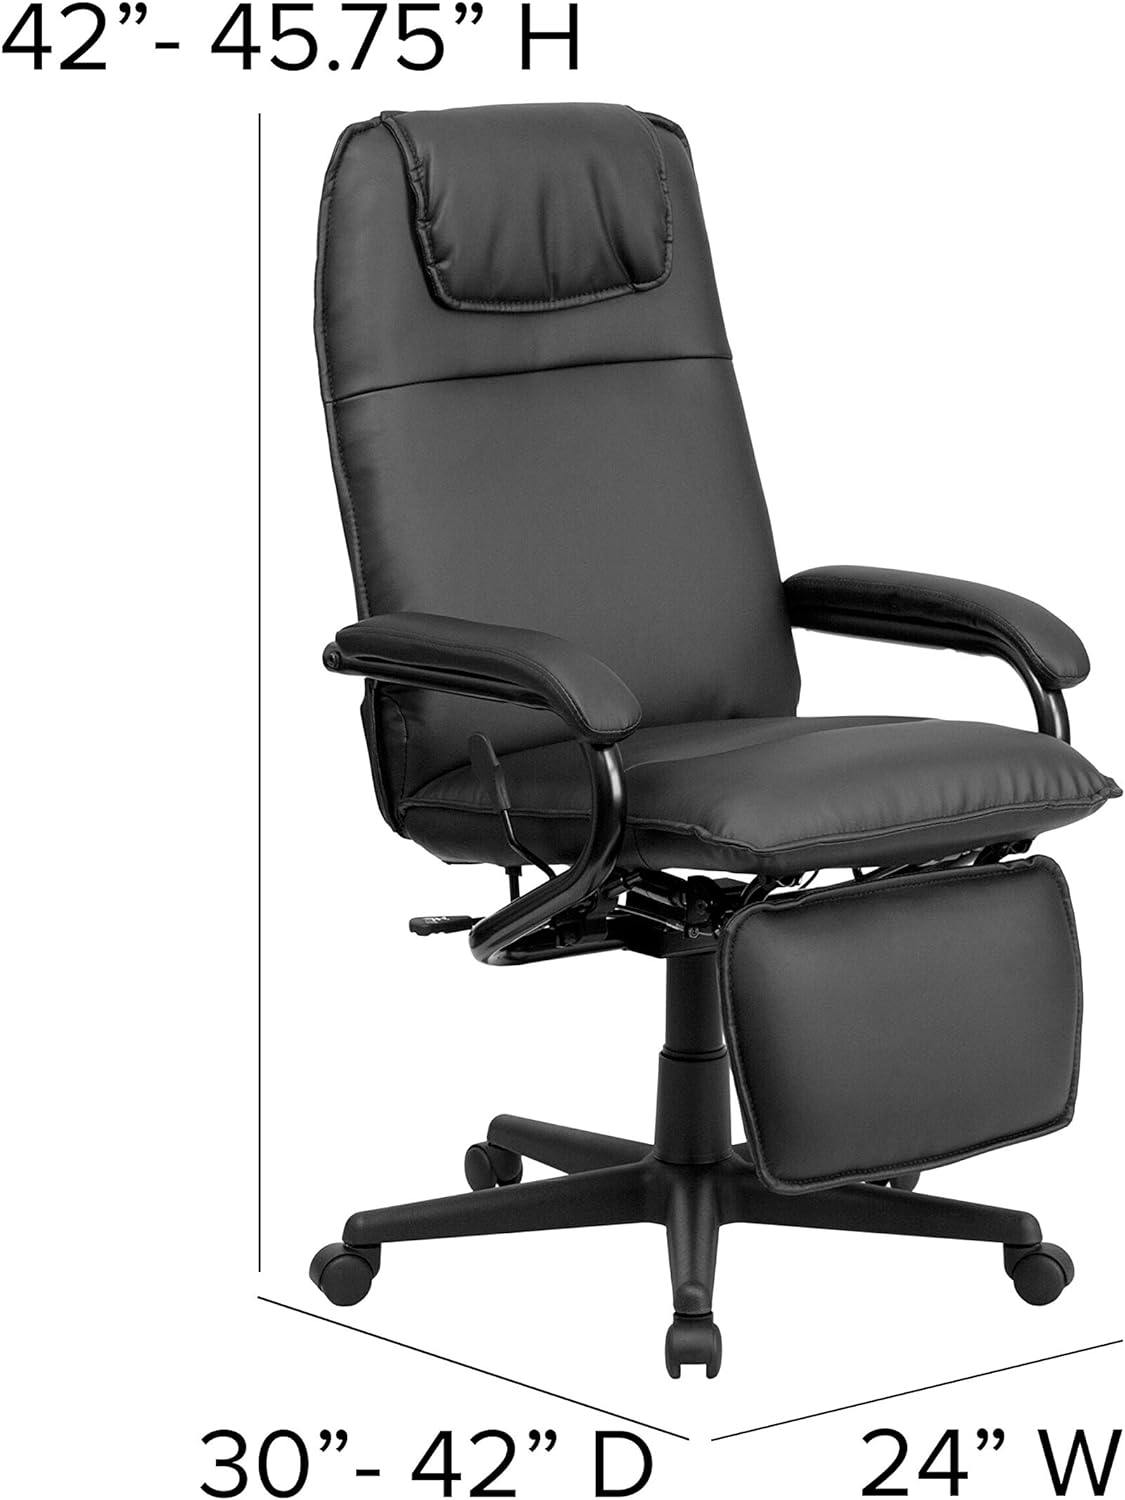 Elegance Executive High Back Swivel Chair with LeatherSoft and Adjustable Footrest, Black